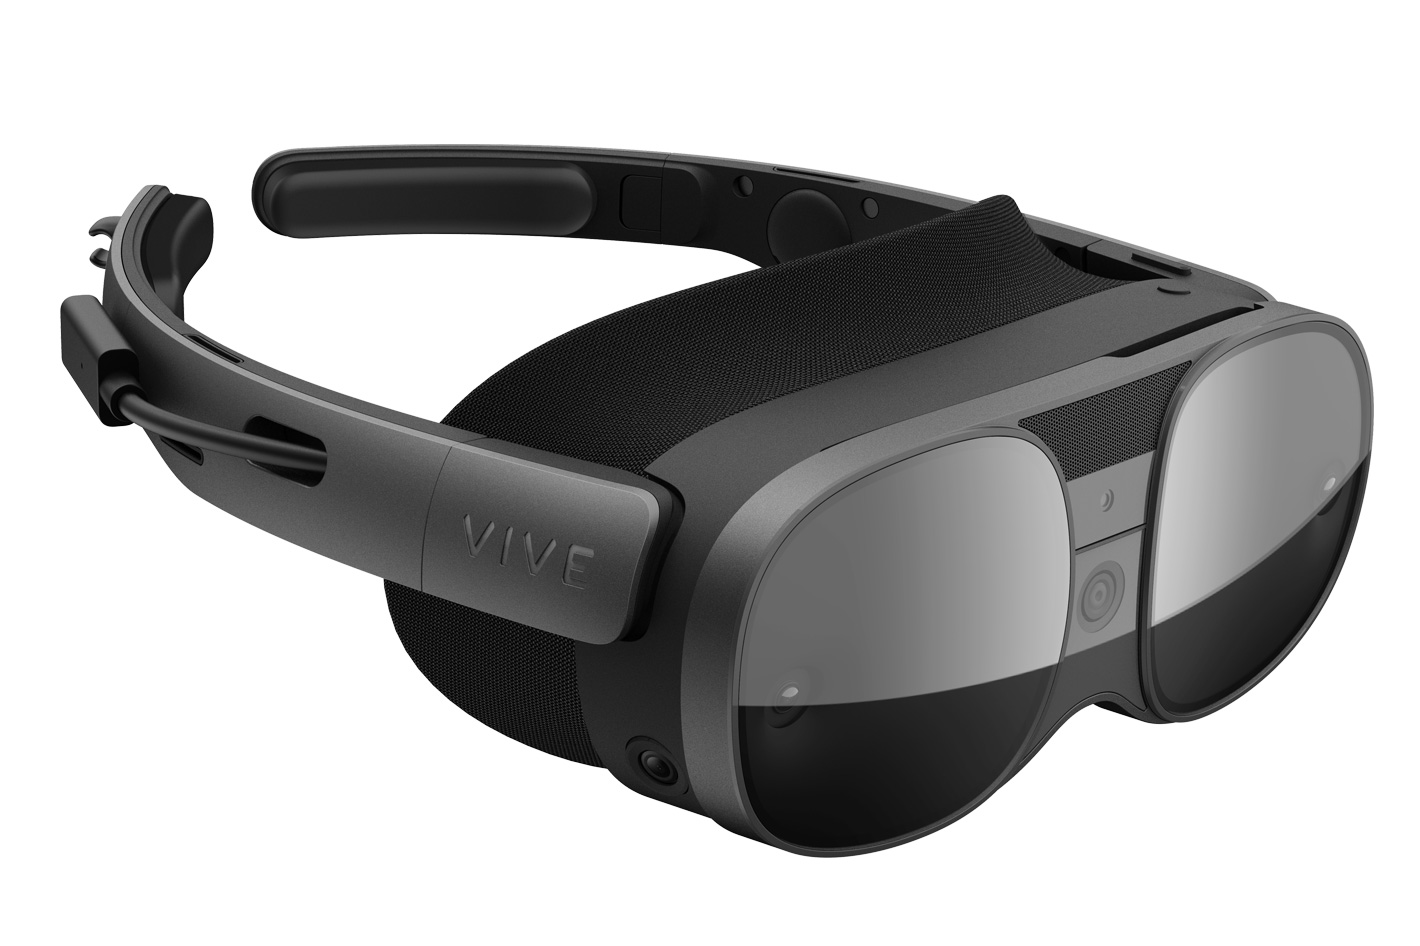 VIVE XR Elite: Your 300-inch personal cinema screen